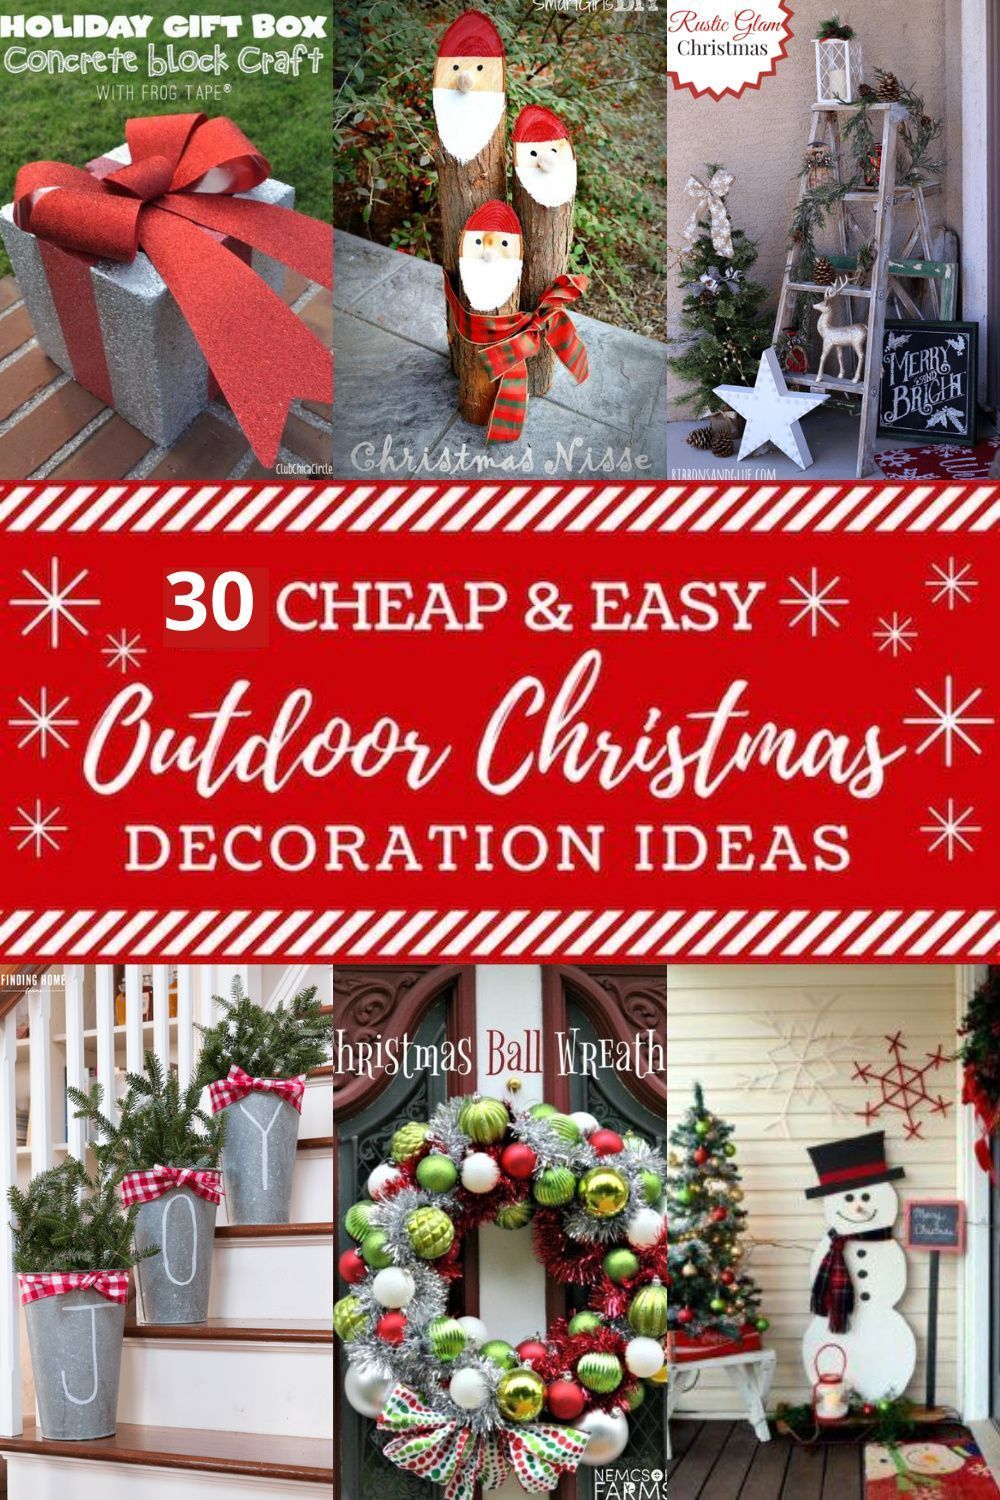 30 Cheap And Easy Outdoor Christmas Decoration Ideas -   18 christmas decorations diy outdoor yards ideas